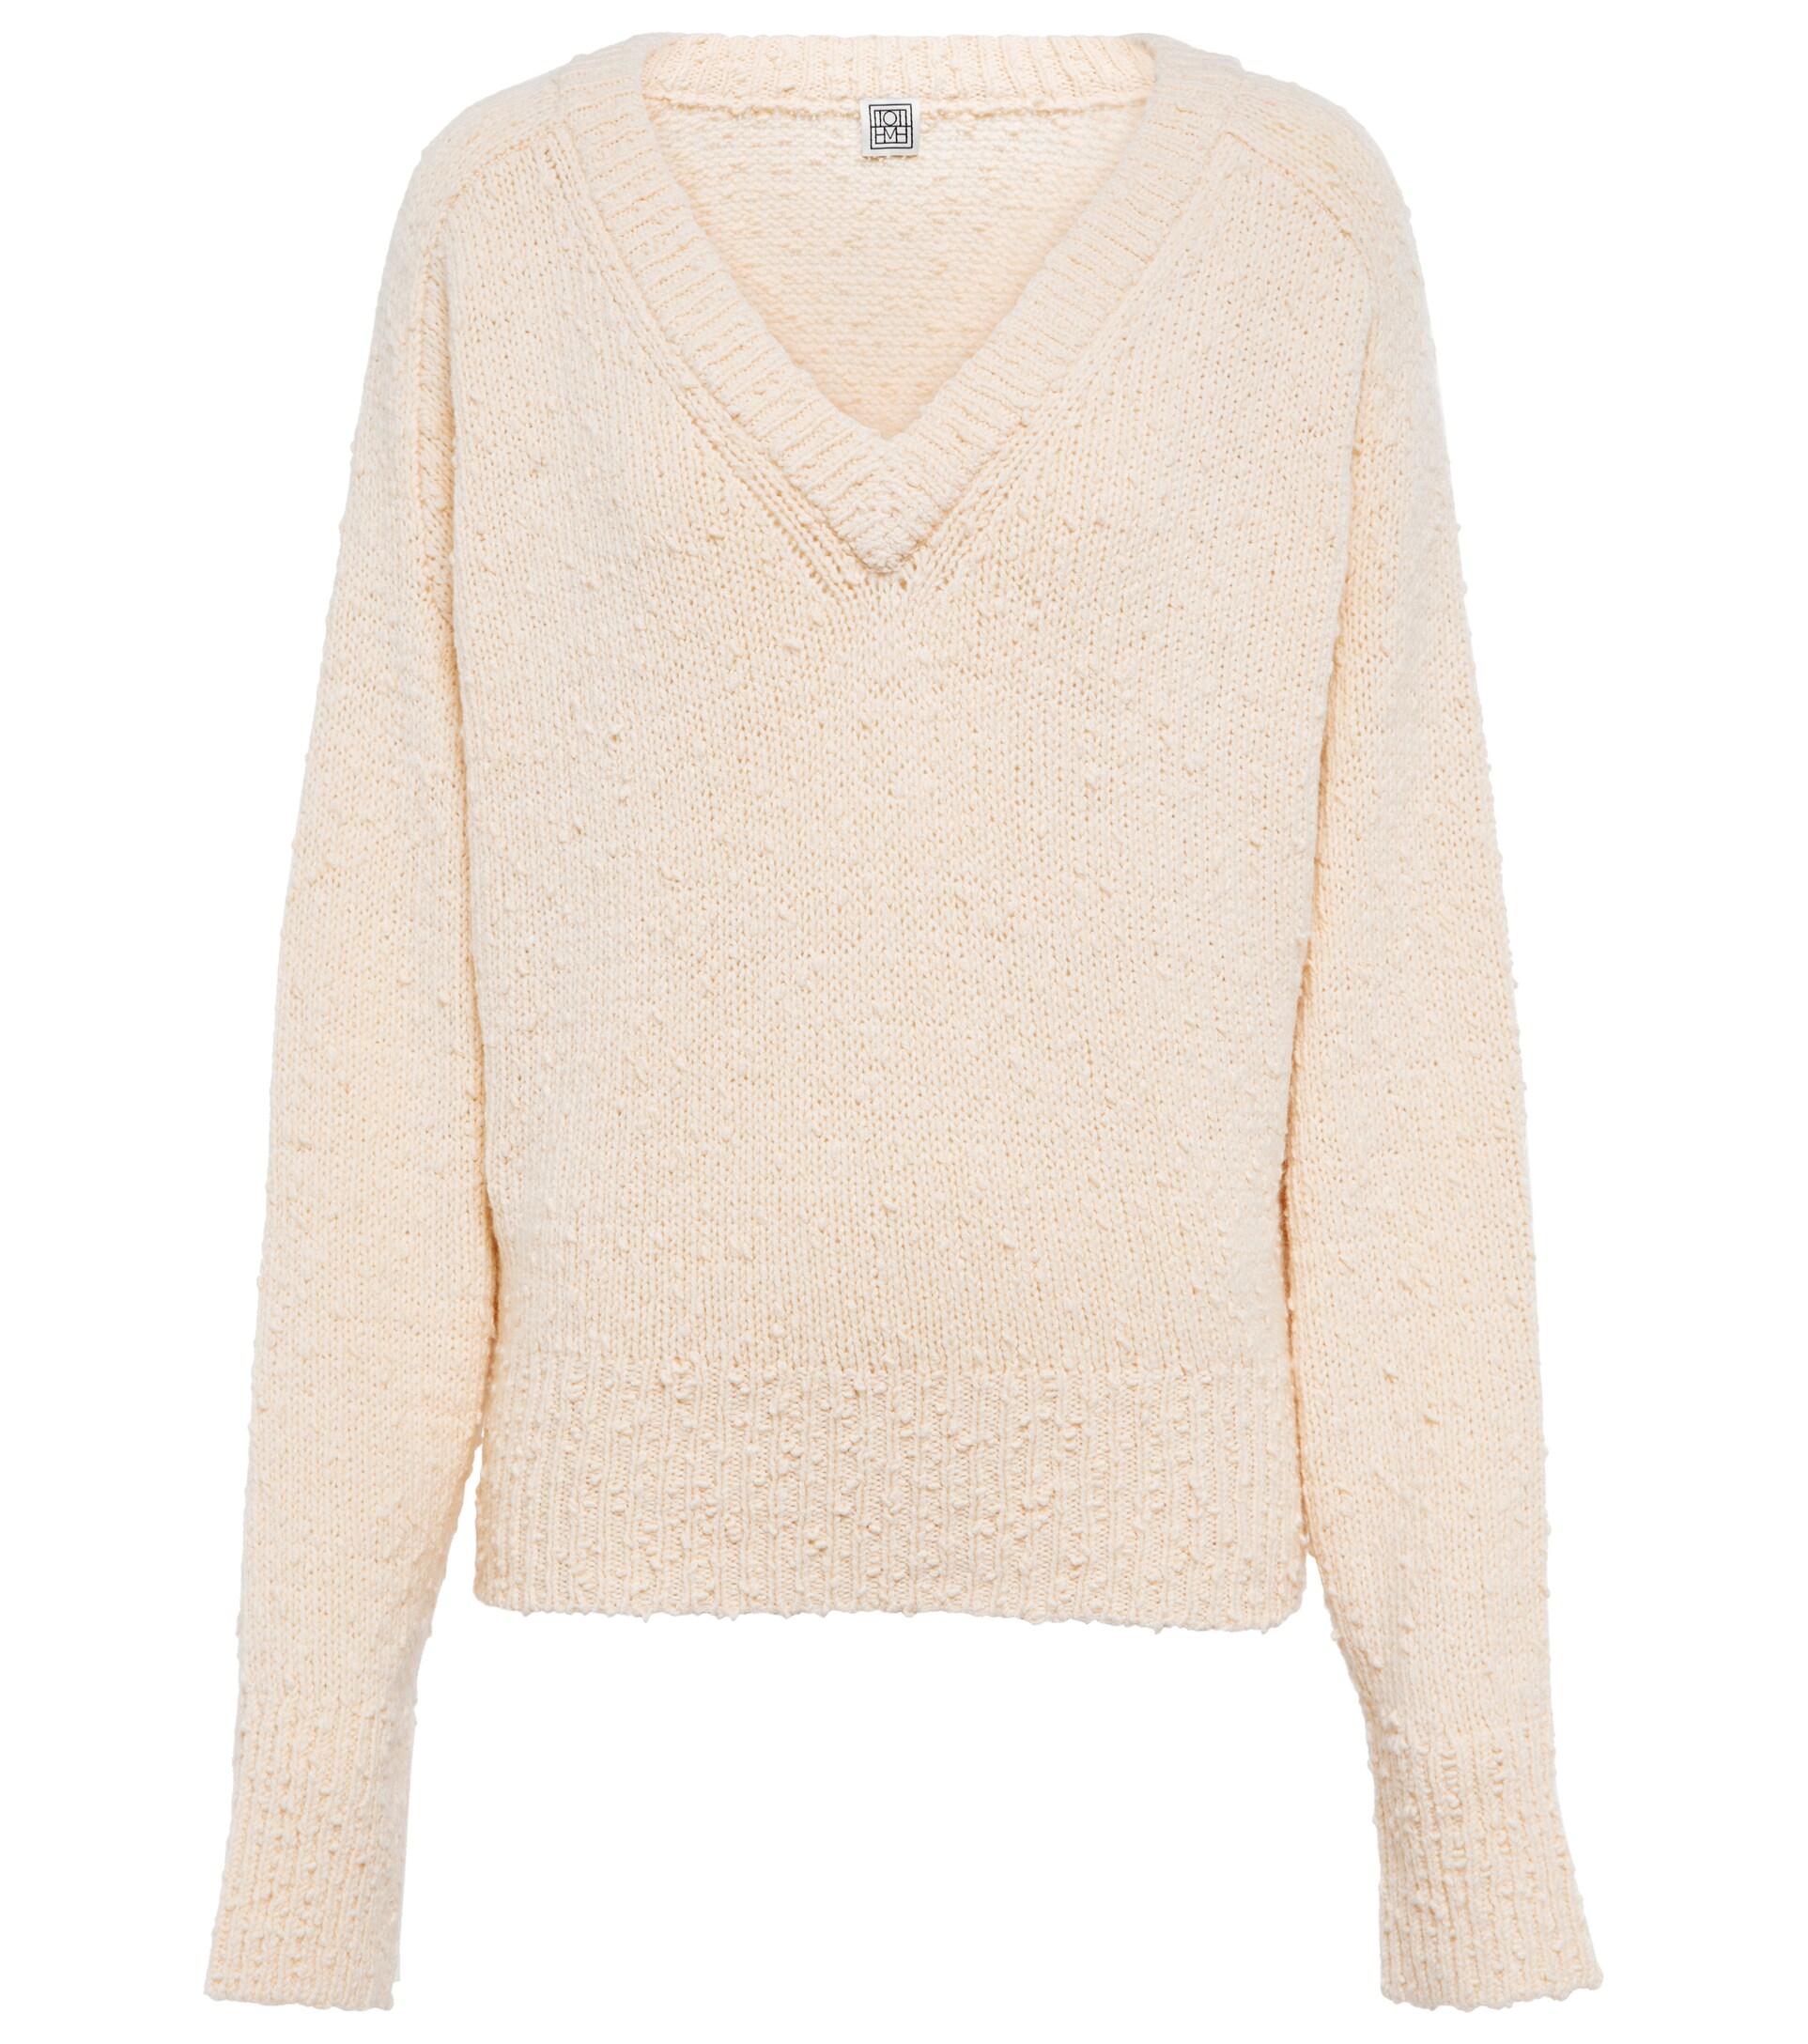 Totême Toteme Wool Sweater in Natural | Lyst